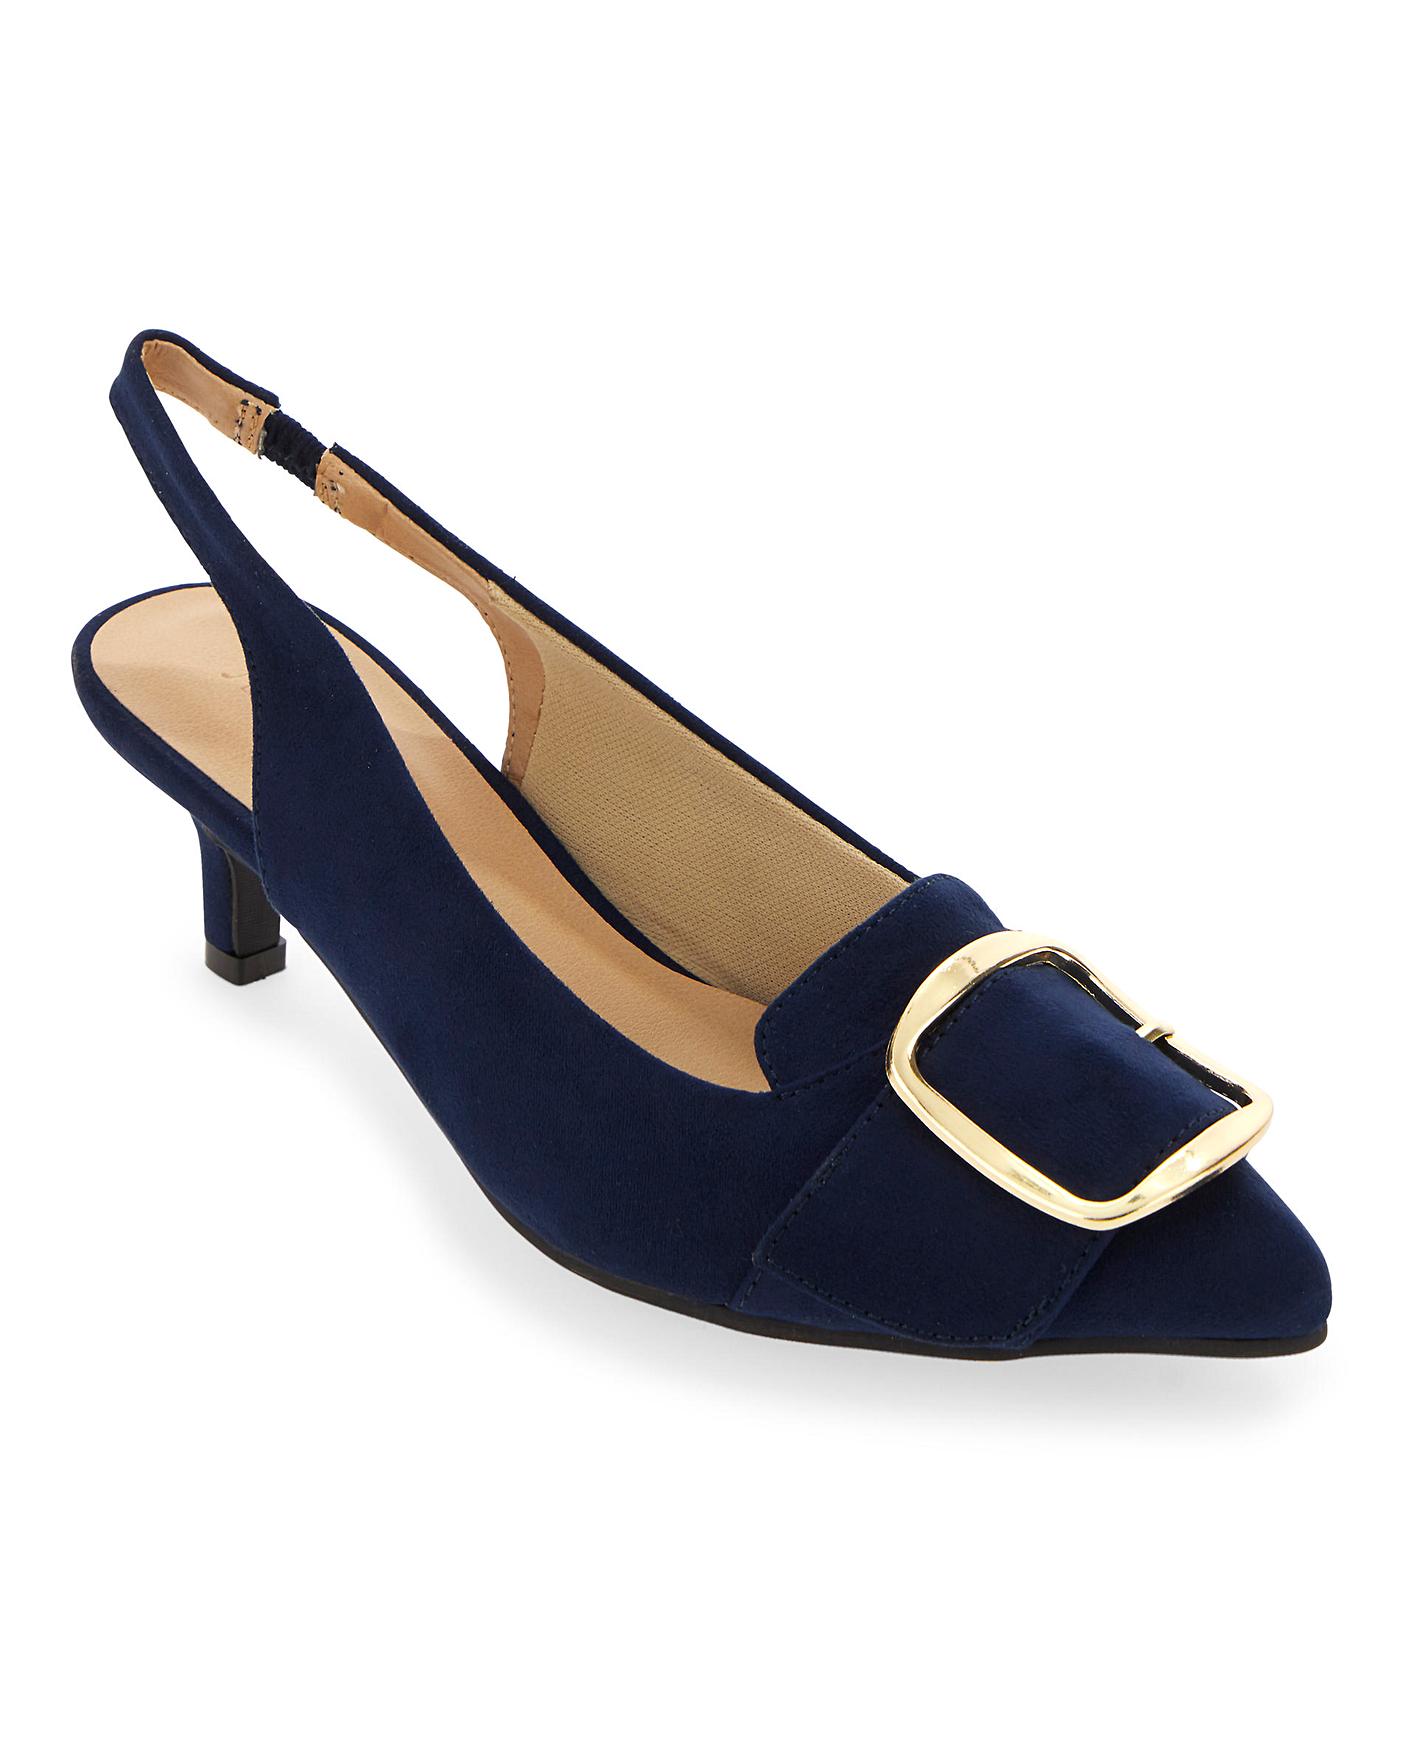 Kitten Heel Shoes With Trim E Fit | J D Williams